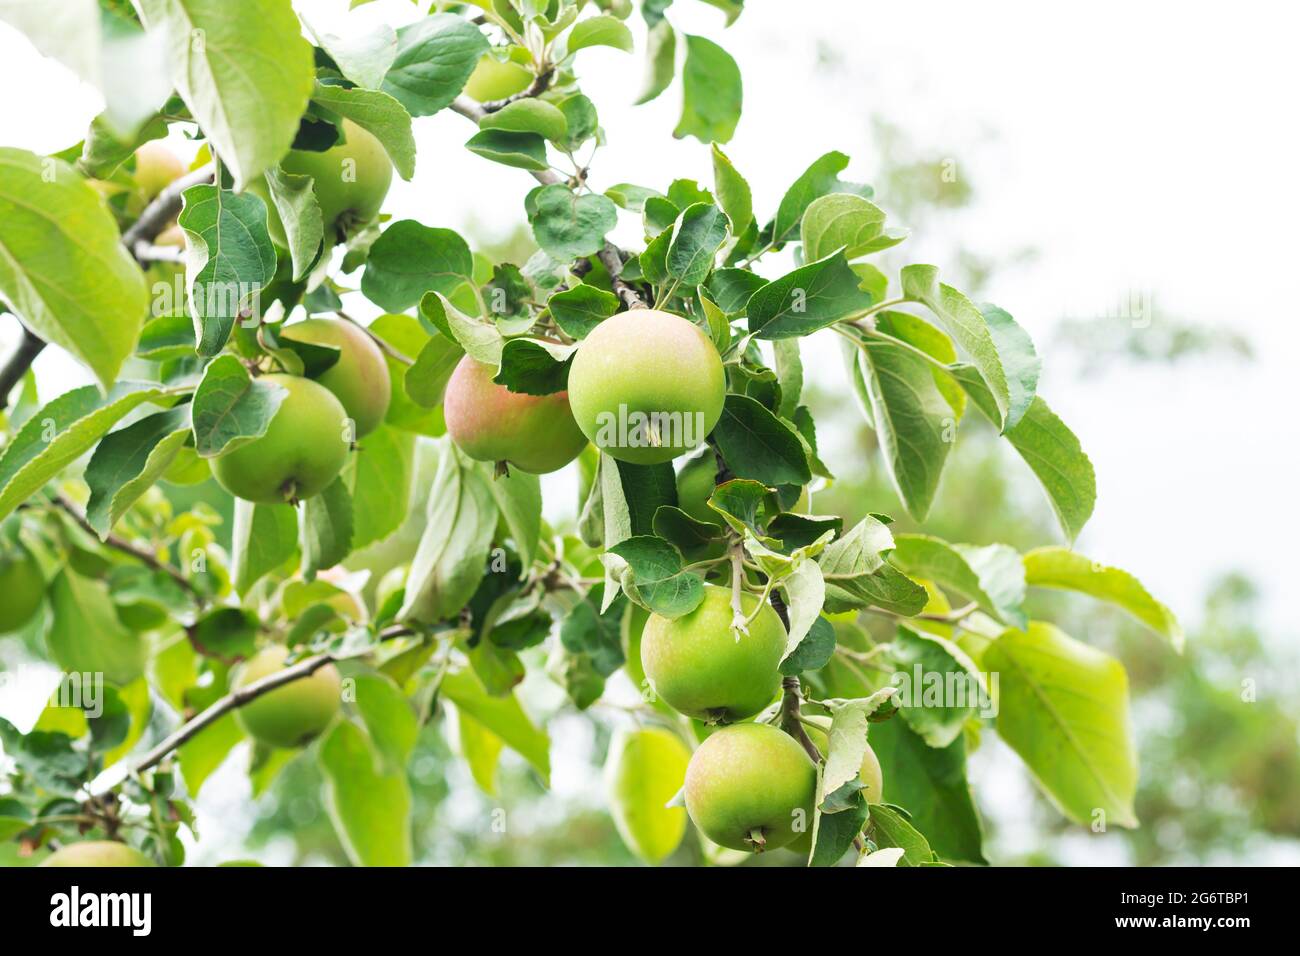 Green ripe organic apples on tree branch ready to be harvested at local eco farm Stock Photo